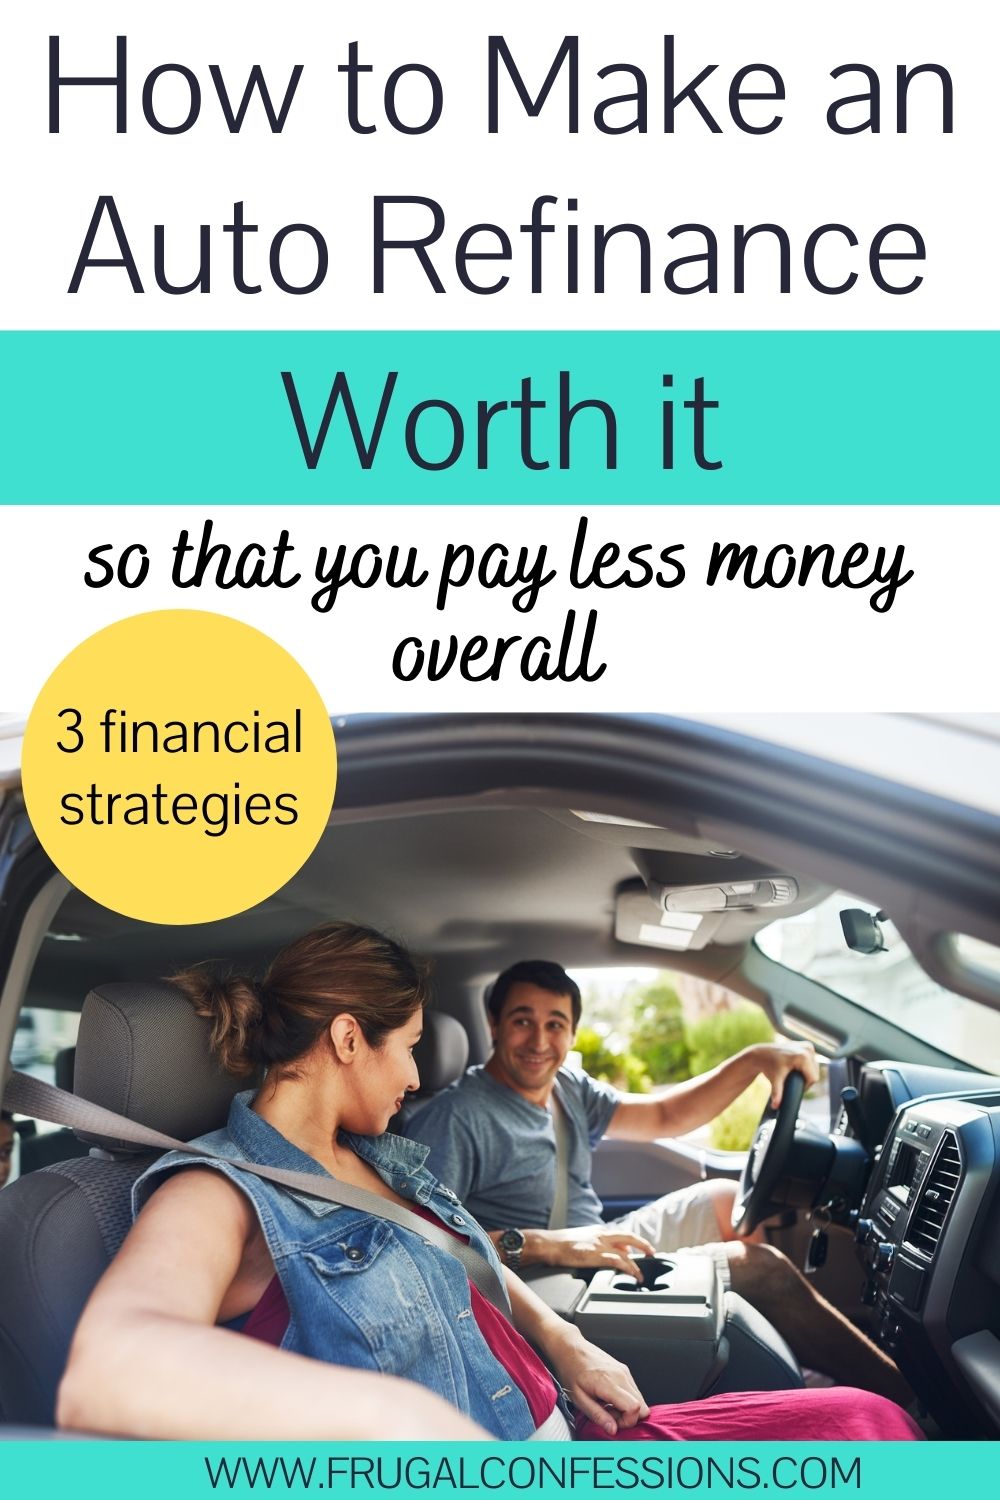 Woman and man in car driving, text overlay "how to make an auto refinance worth it so that you pay less money overall"